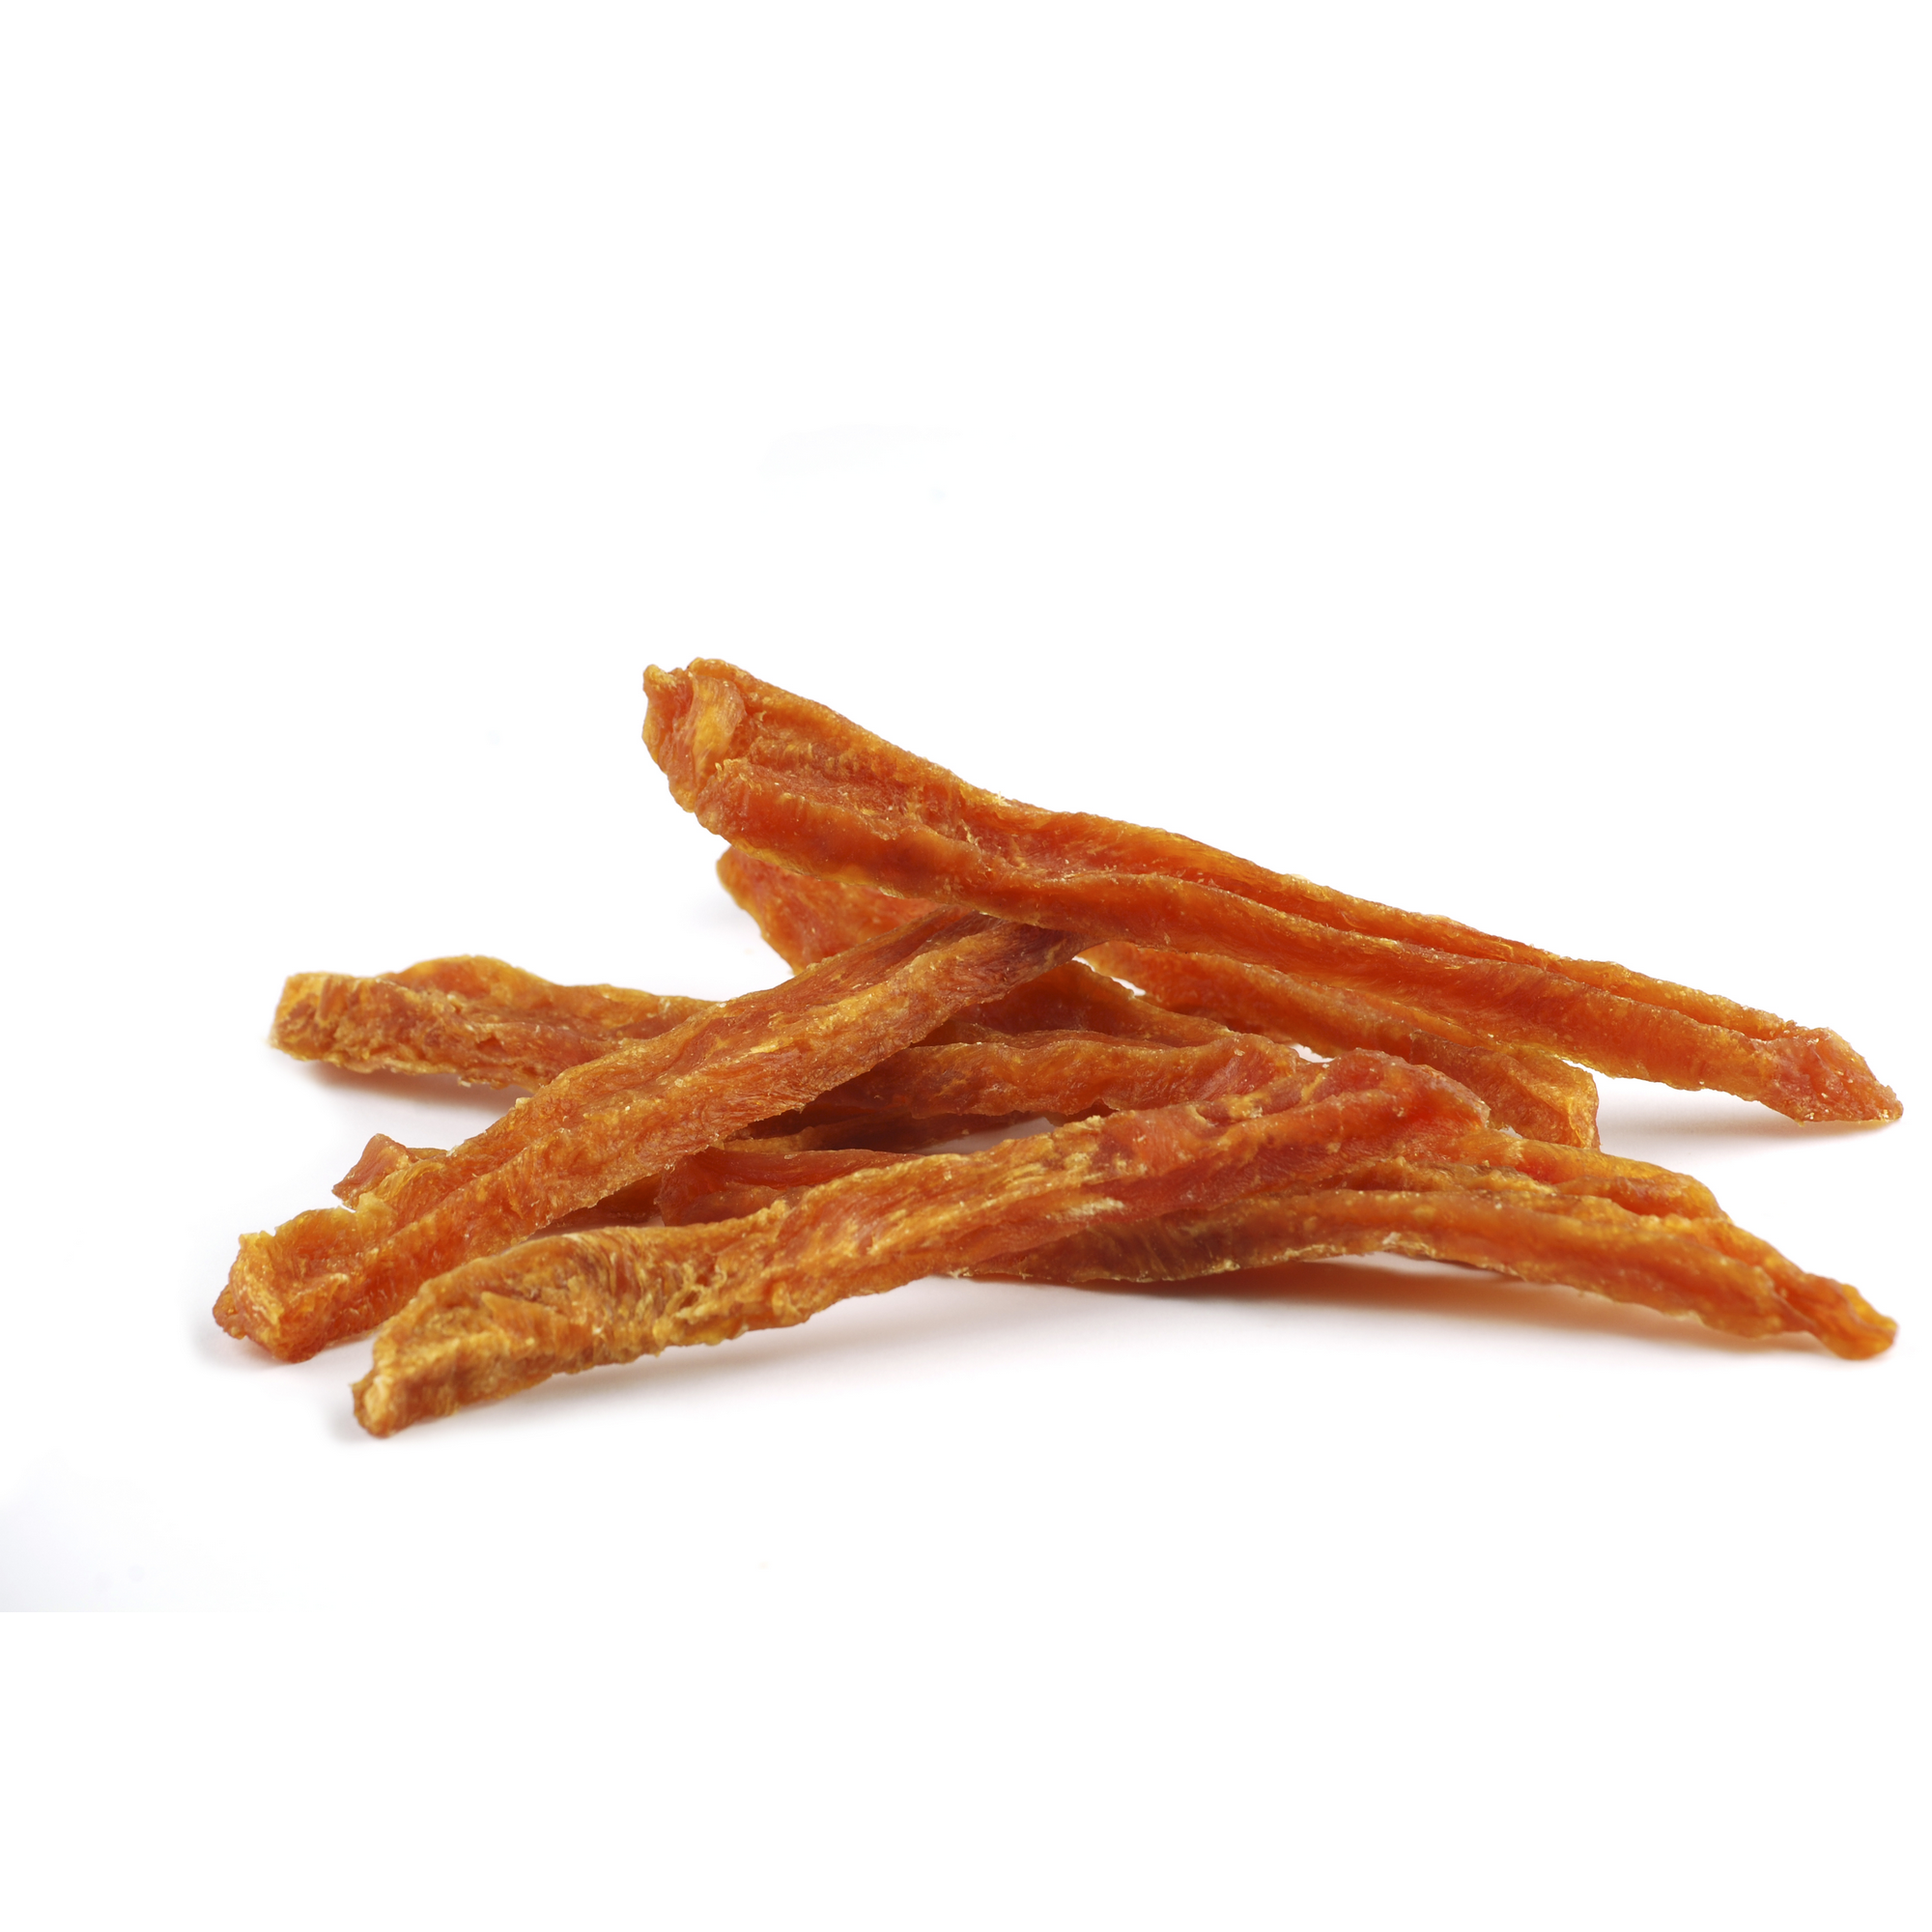 Chicken Strips 500 gr DIBO + product picture